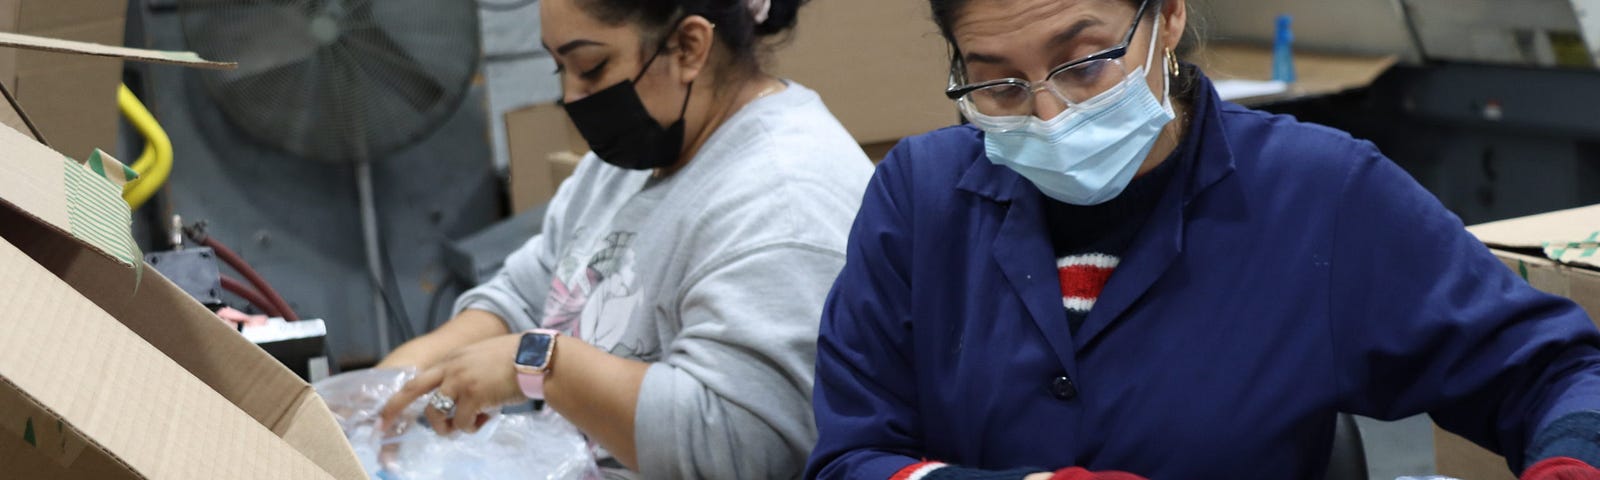 Two Latina immigrants work together to package plastic molds at a factory owned by the American Comb Corporation and Bennett Plastics. The plant is located in the industrial district of Paterson, New Jersey.